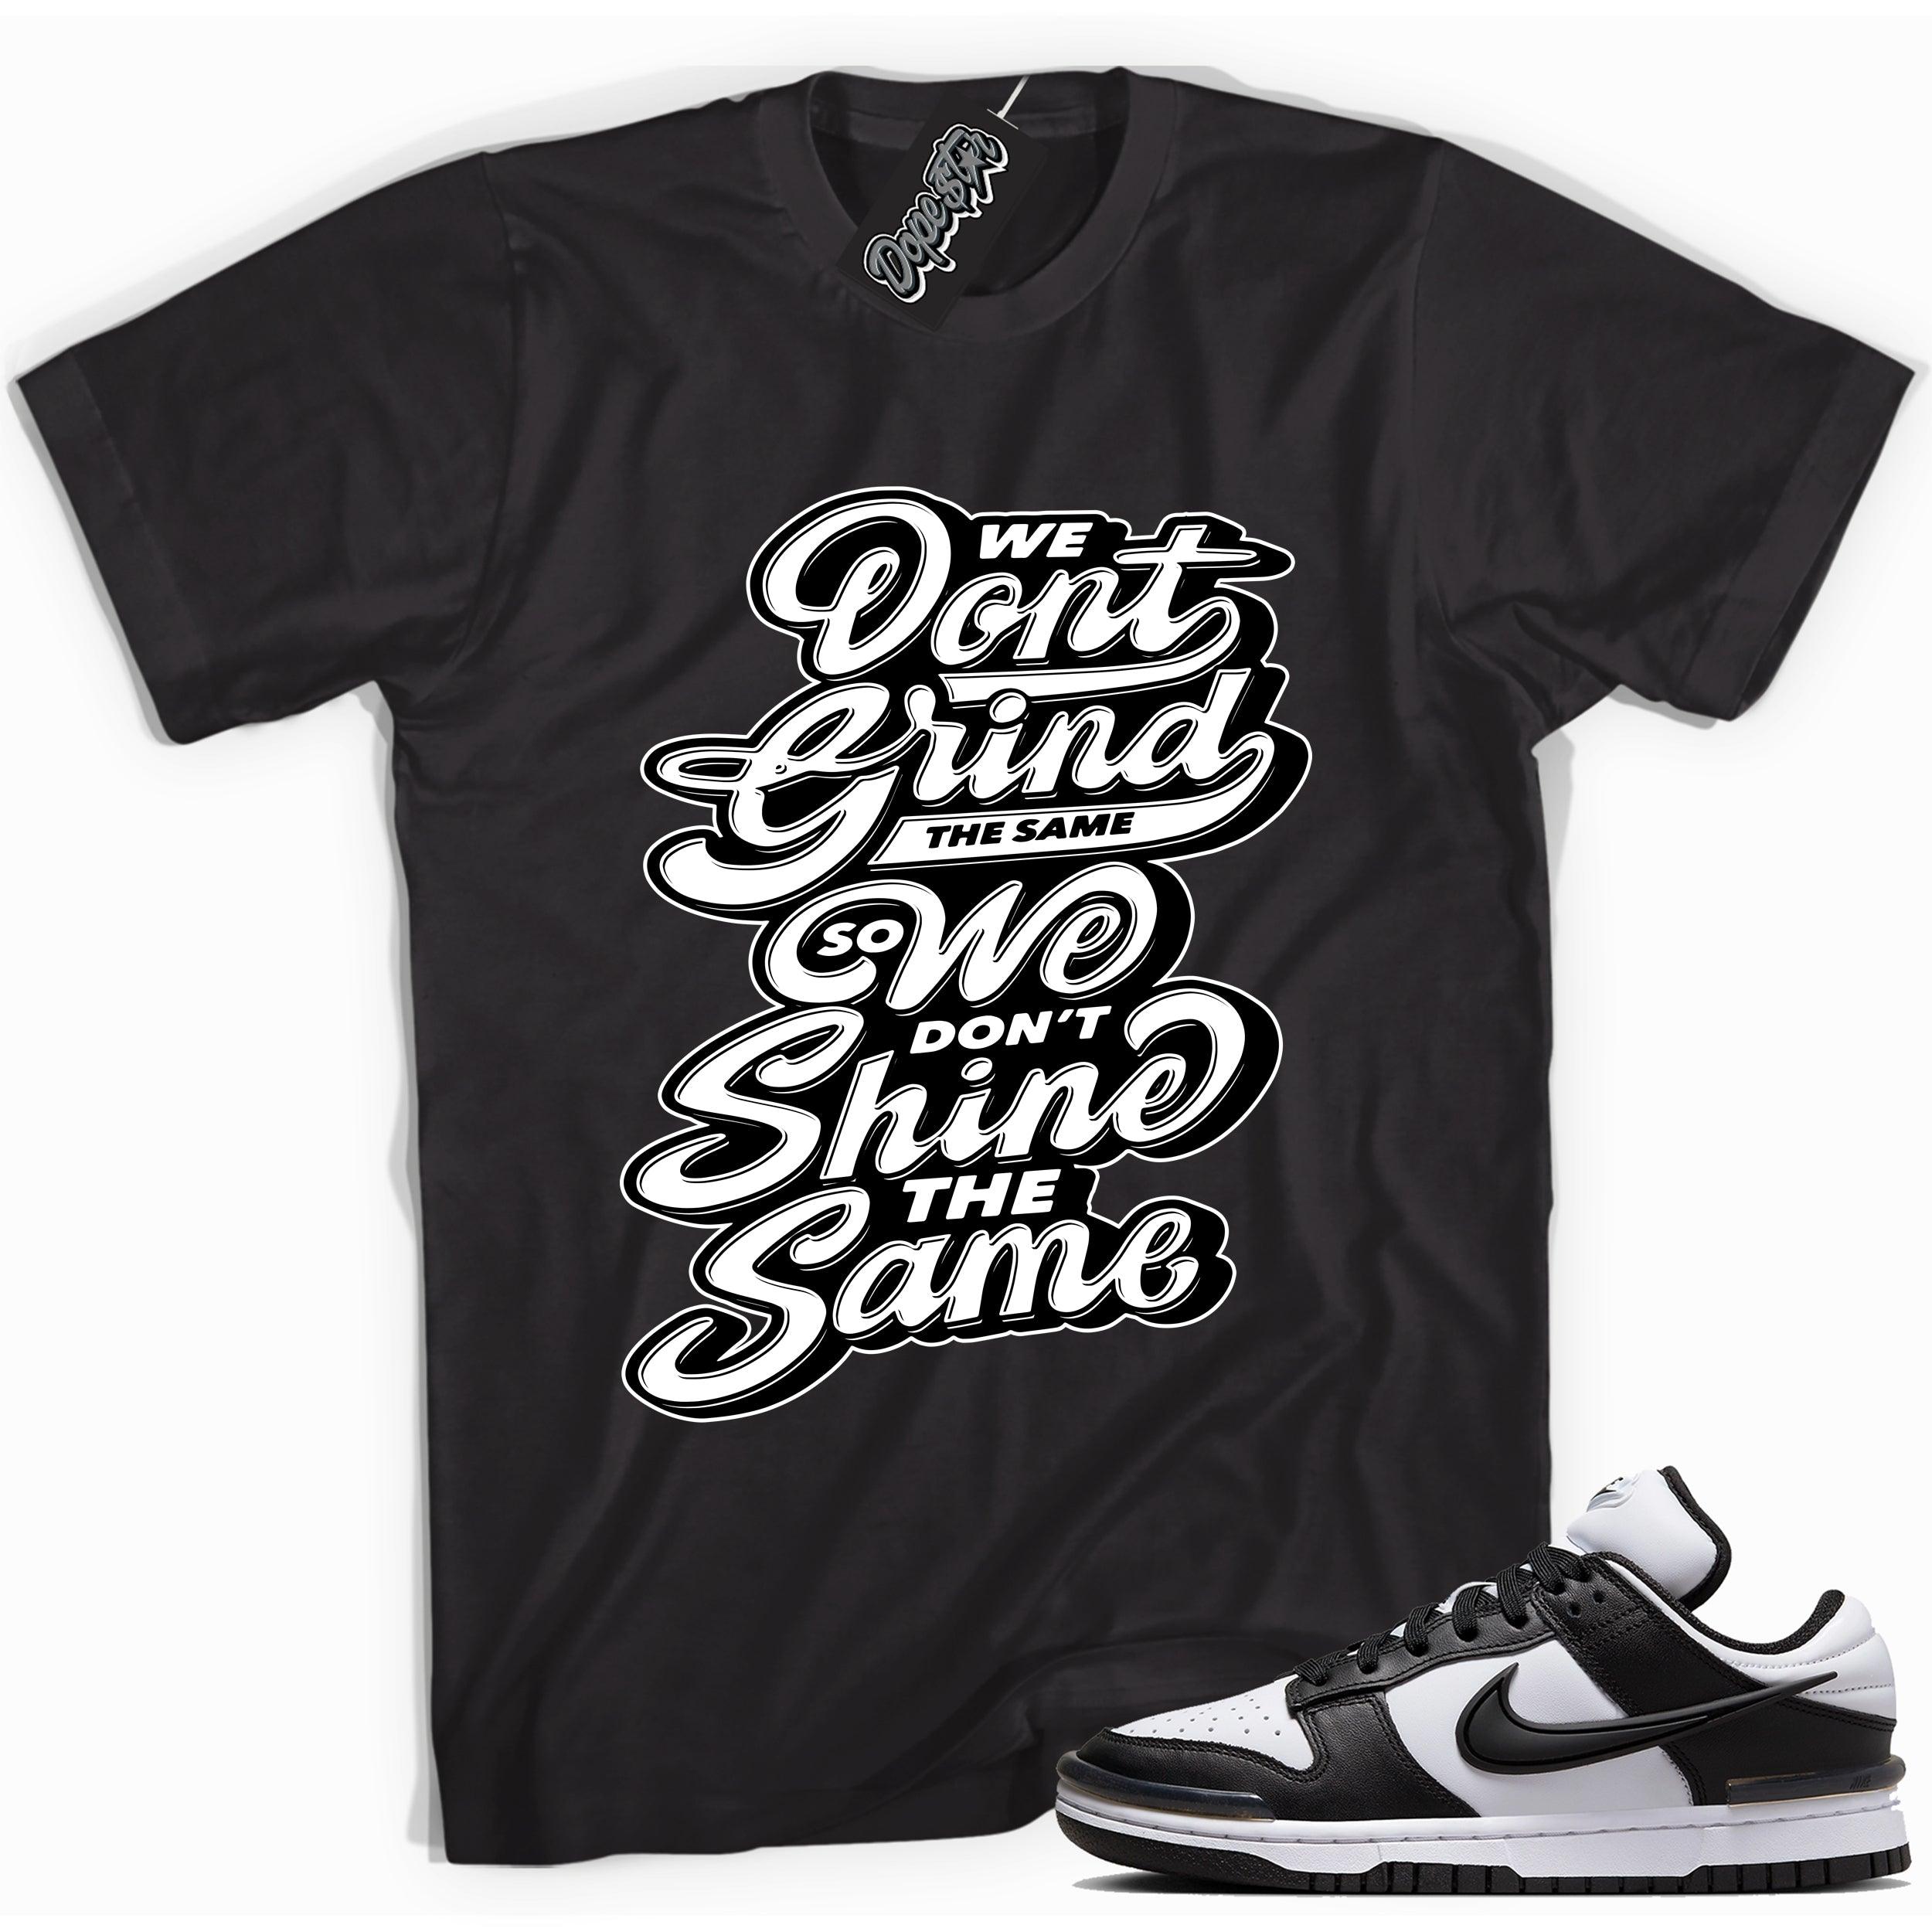 Cool black graphic tee with 'grind shine' print, that perfectly matches Nike Dunk Low Twist Panda sneakers.